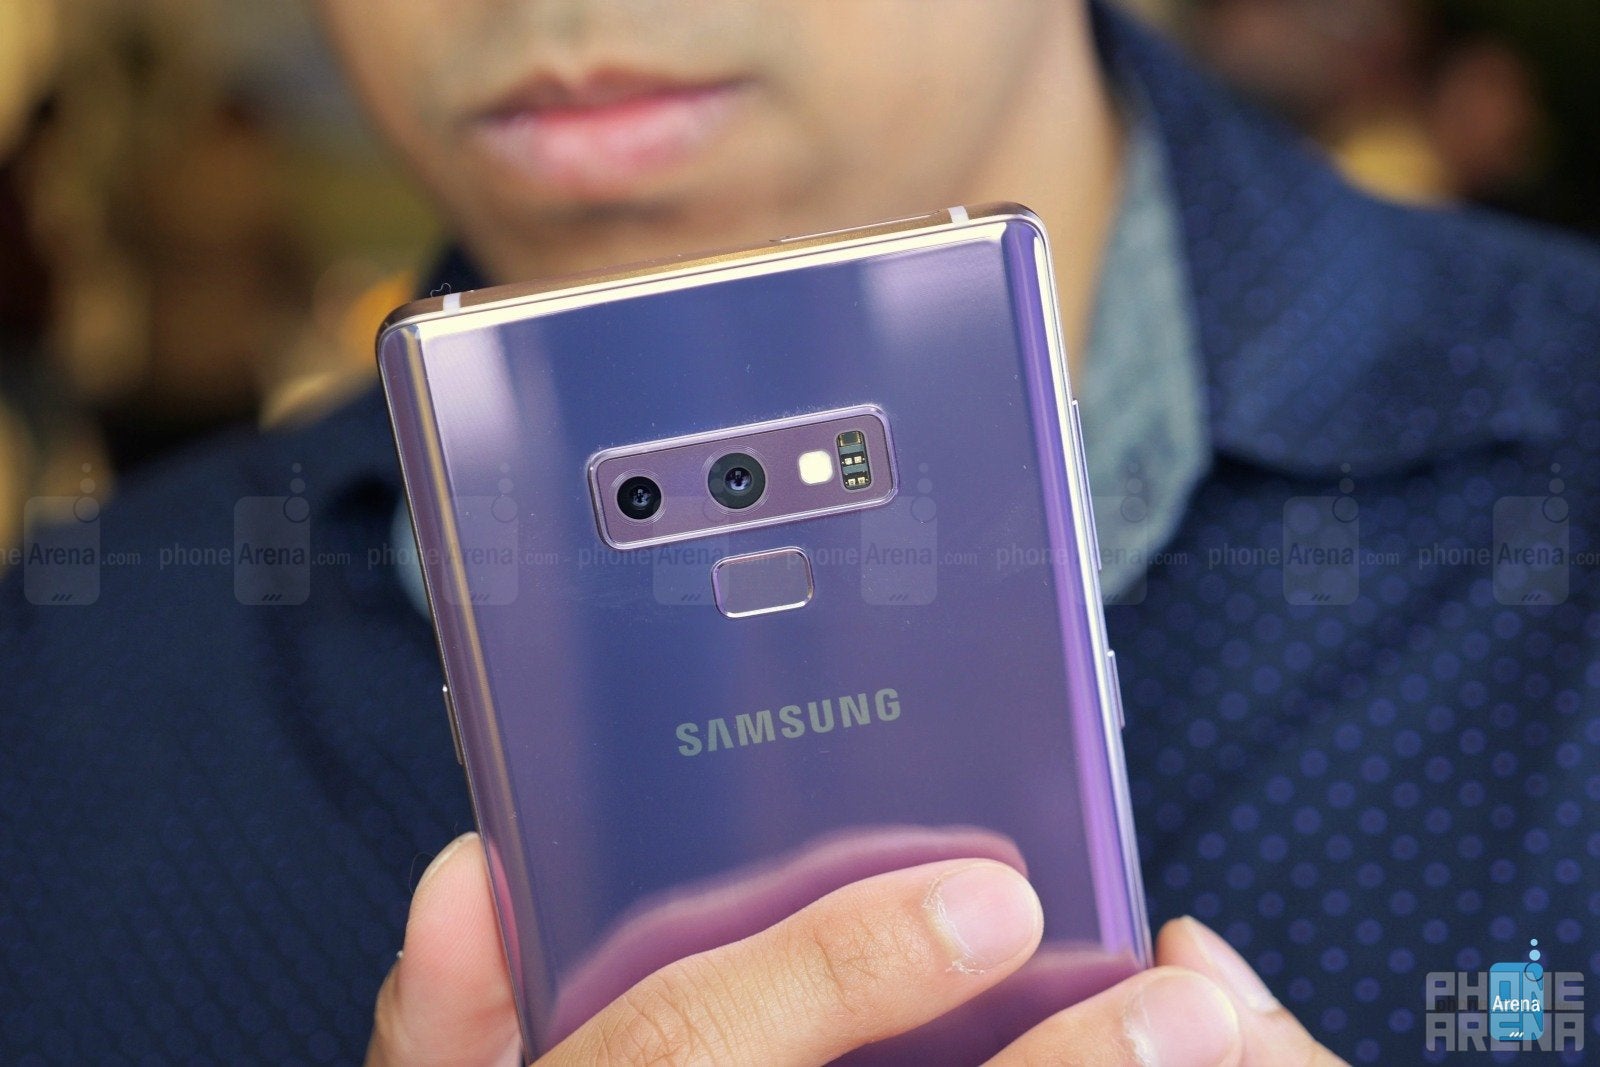 Samsung Galaxy Note 9 hands-on: More of everything!